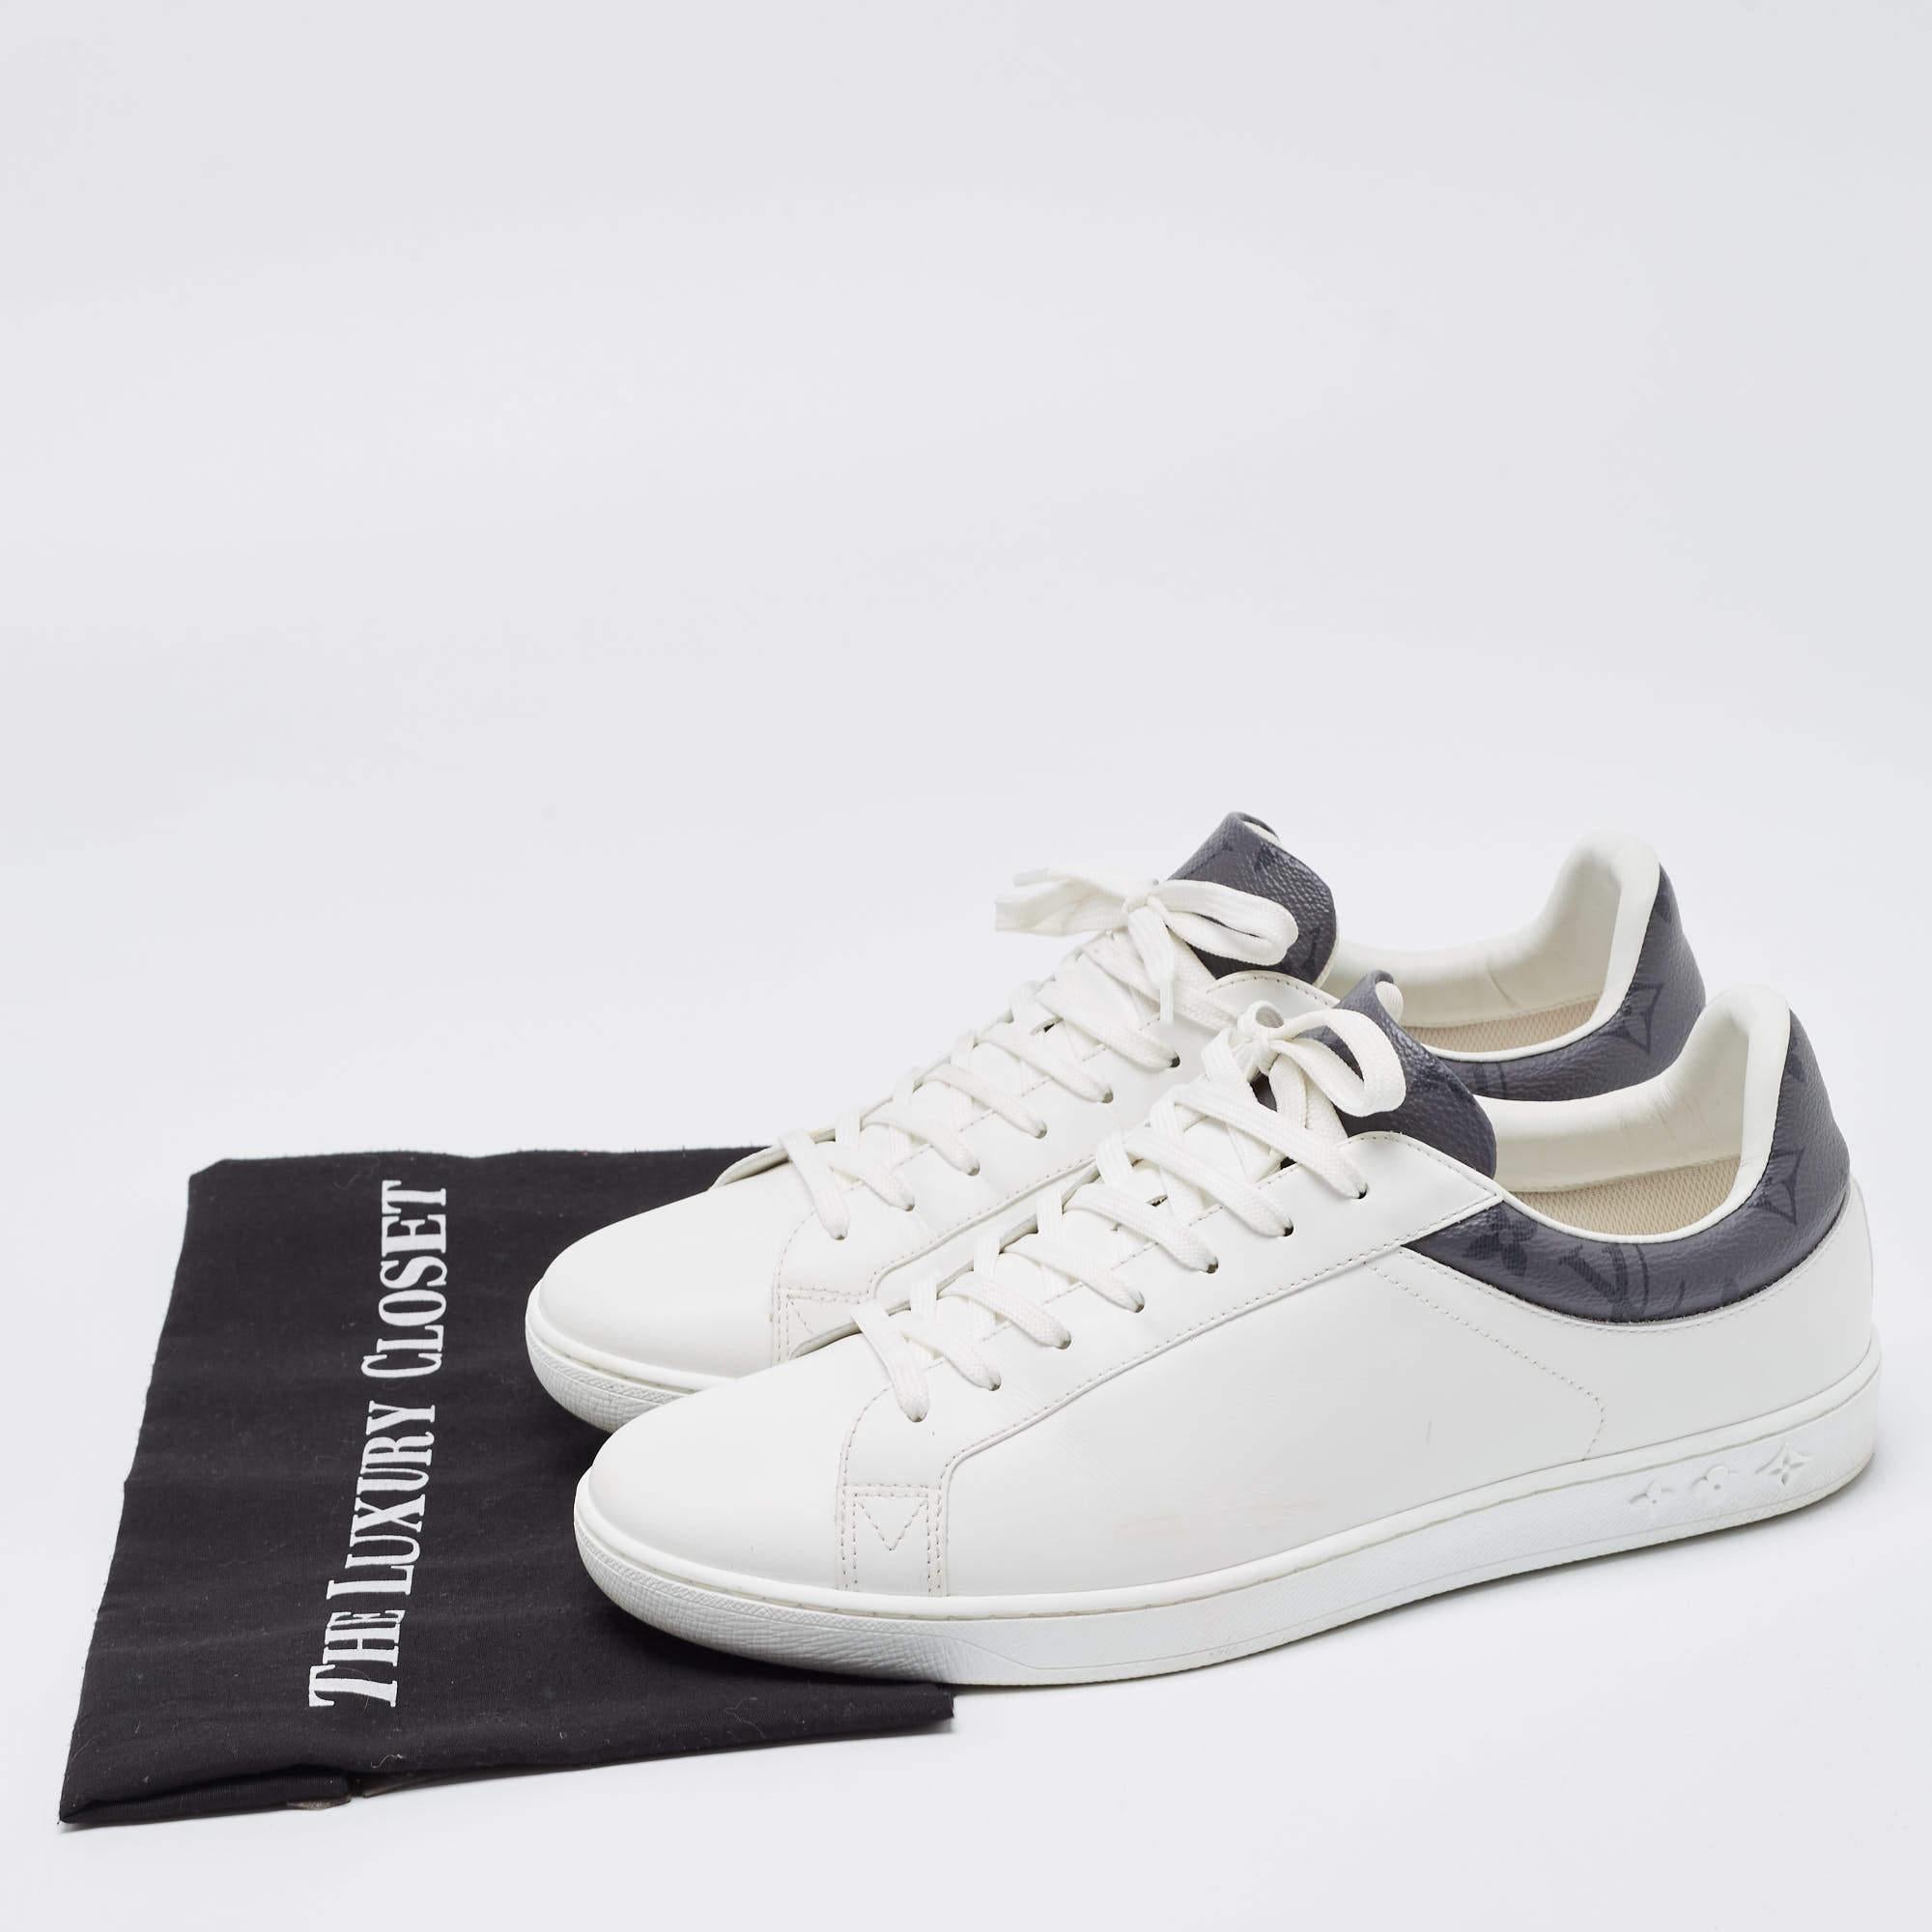 Louis Vuitton White Leather Luxembourg Sneakers Size 41 5